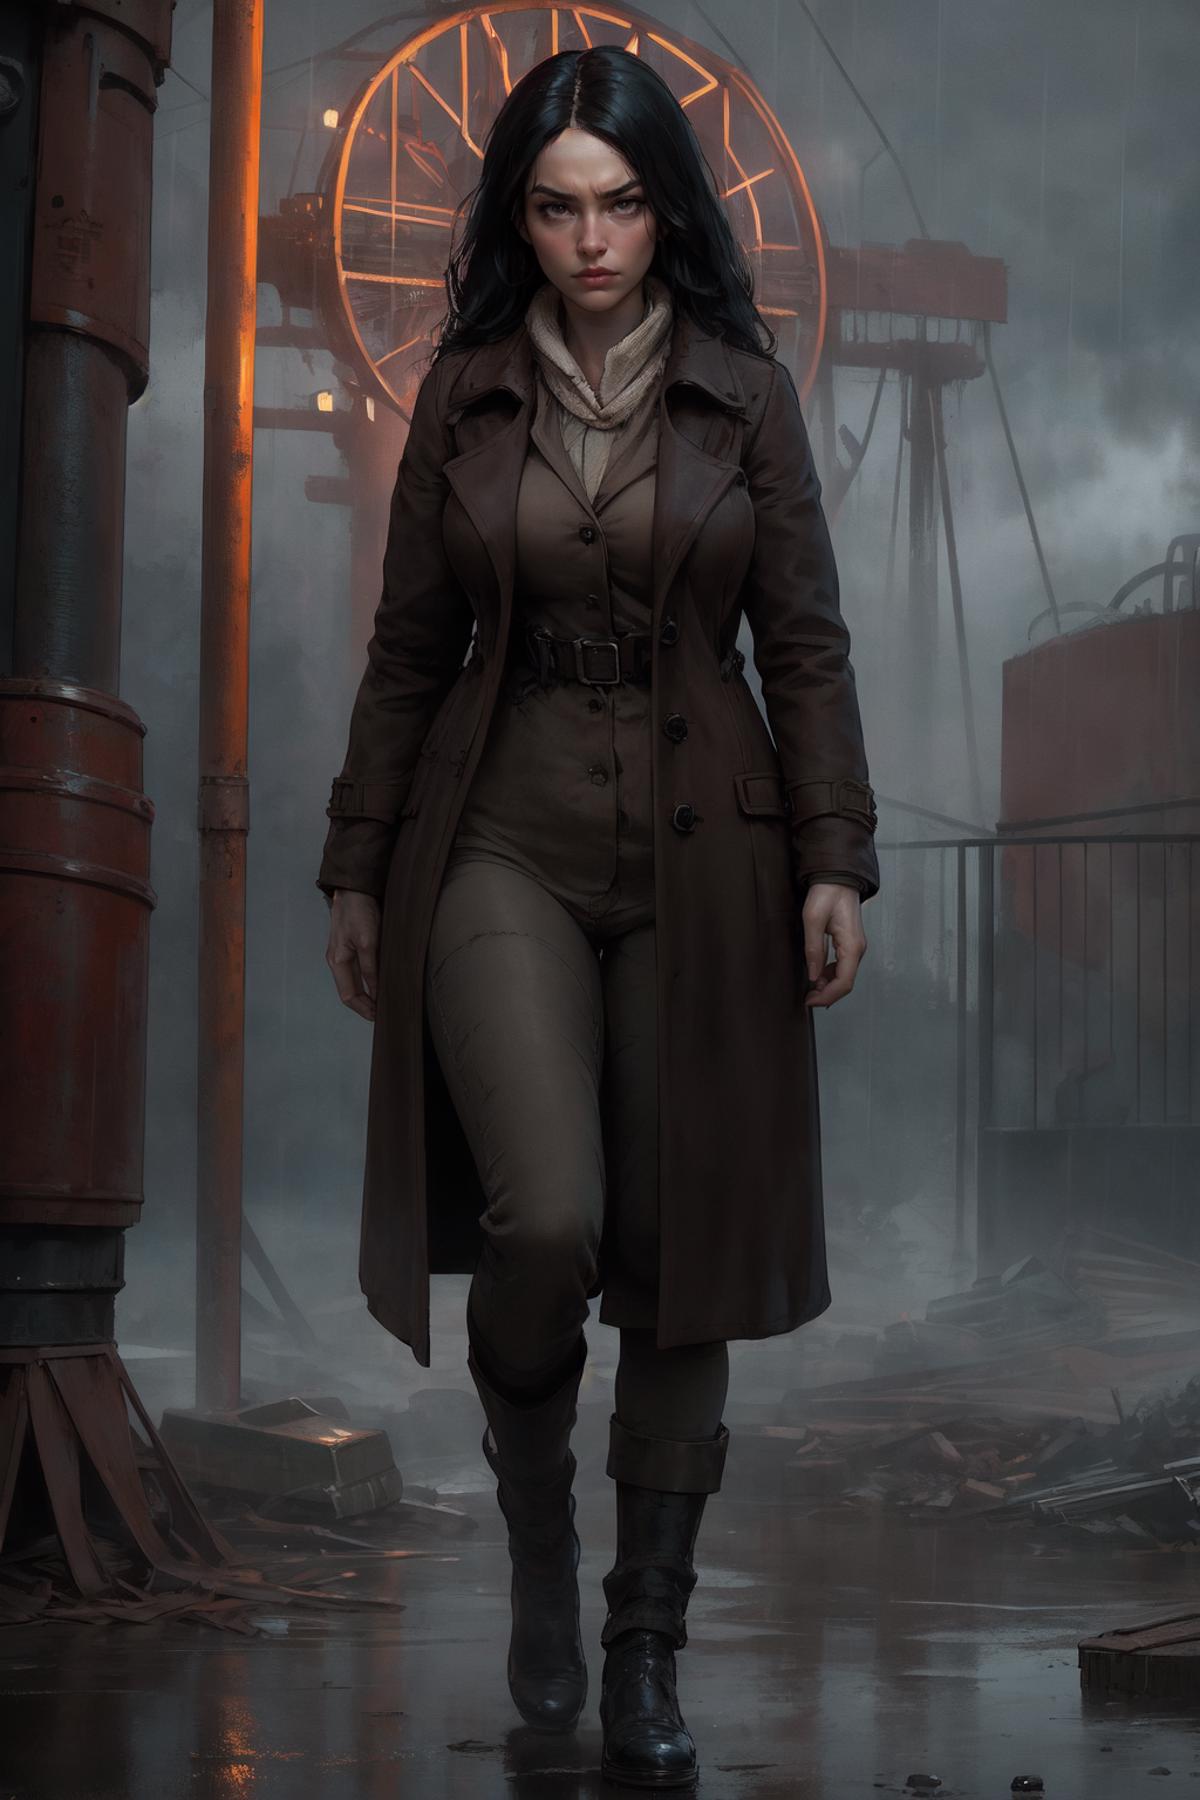 Woman in a trench coat and boots walking in a dark alley.